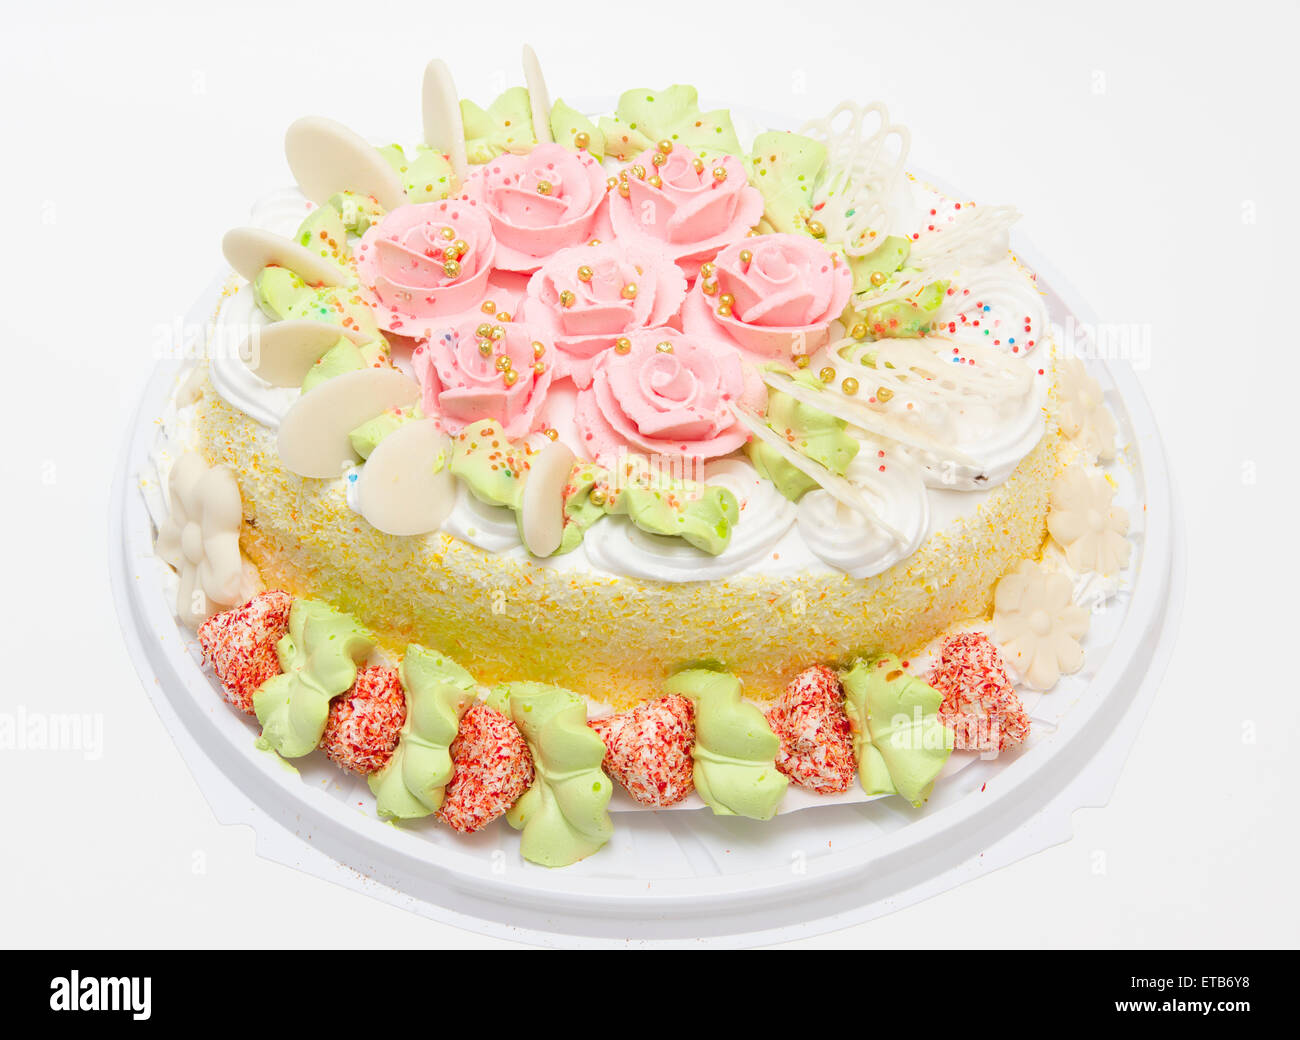 the big sweet pie decorated with cream roses on white background Stock Photo